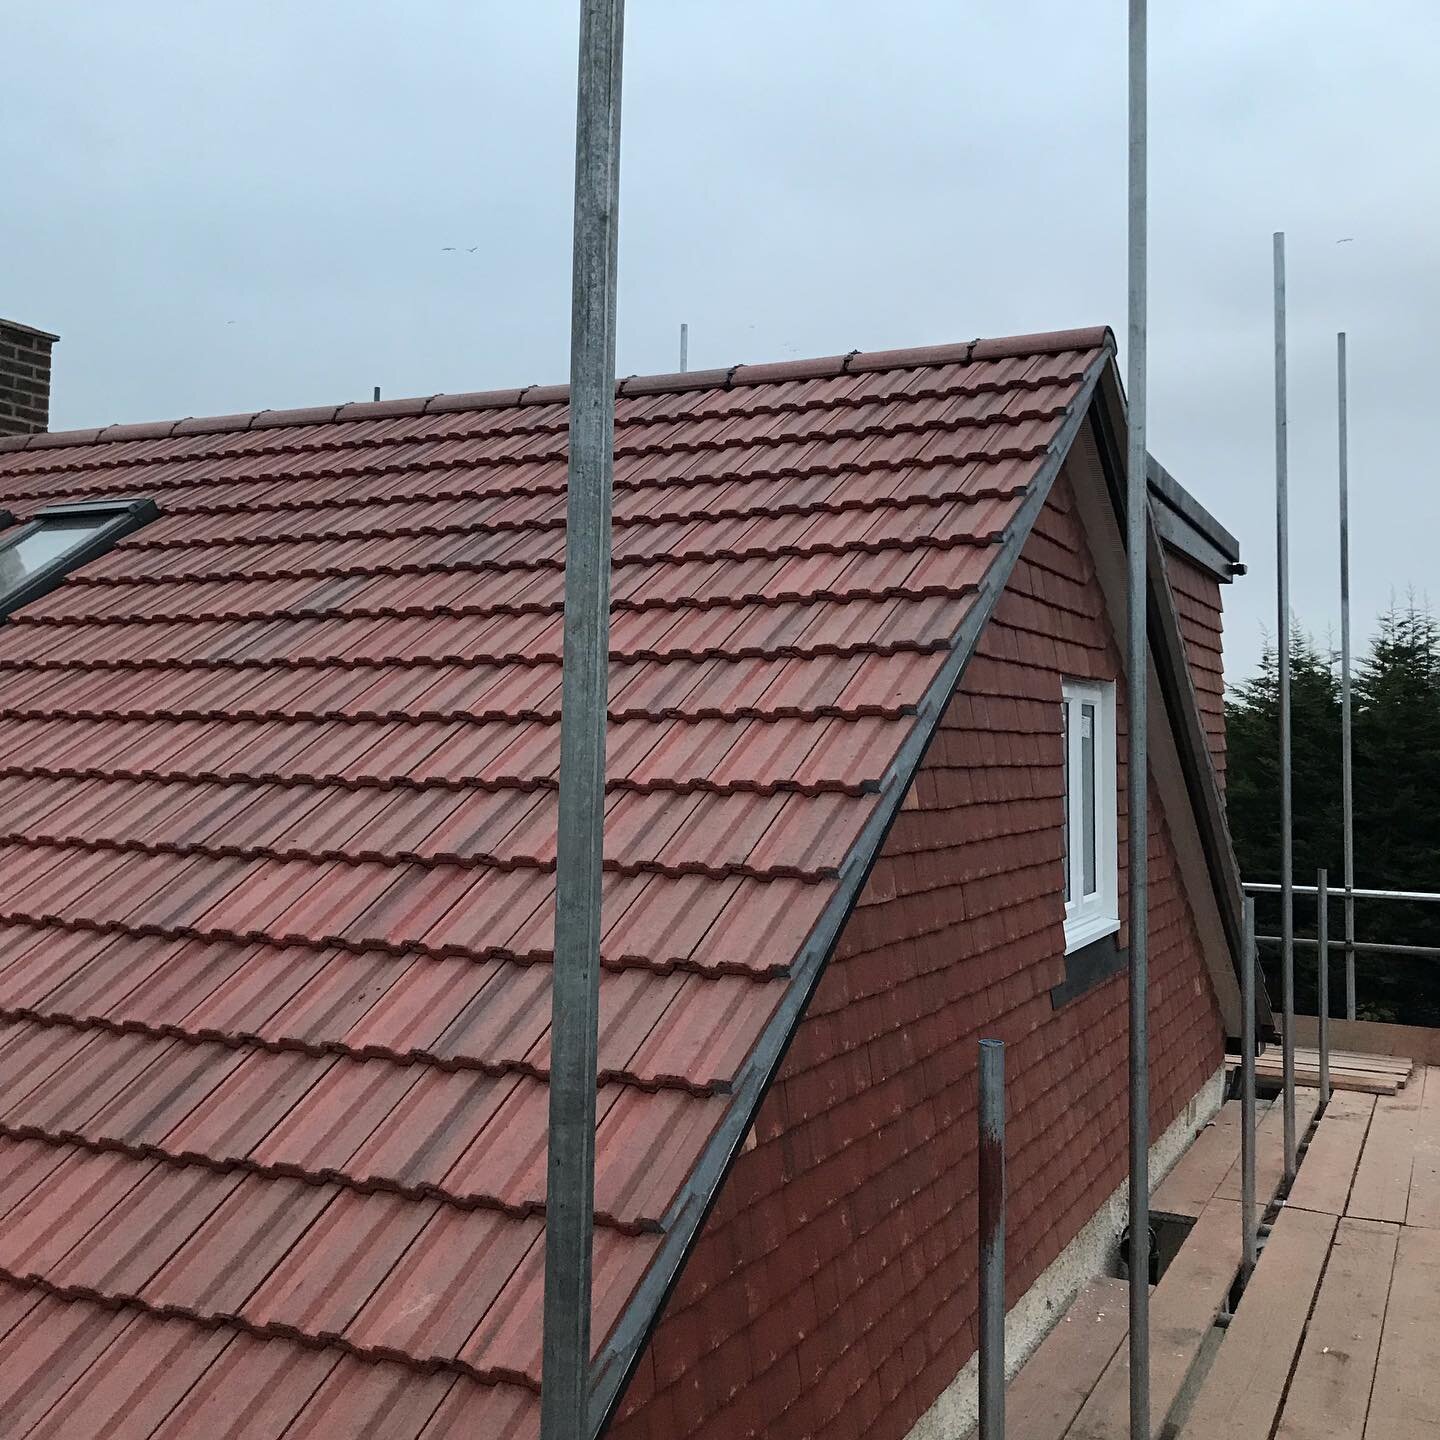 Here&rsquo;s a recent loft conversion we completed in Surbiton. Complete roof off on this one, steels installed, huge dormer formed at the rear. A great new space consisting of a master bedroom and en-suite and additional storage areas! It&rsquo;s so